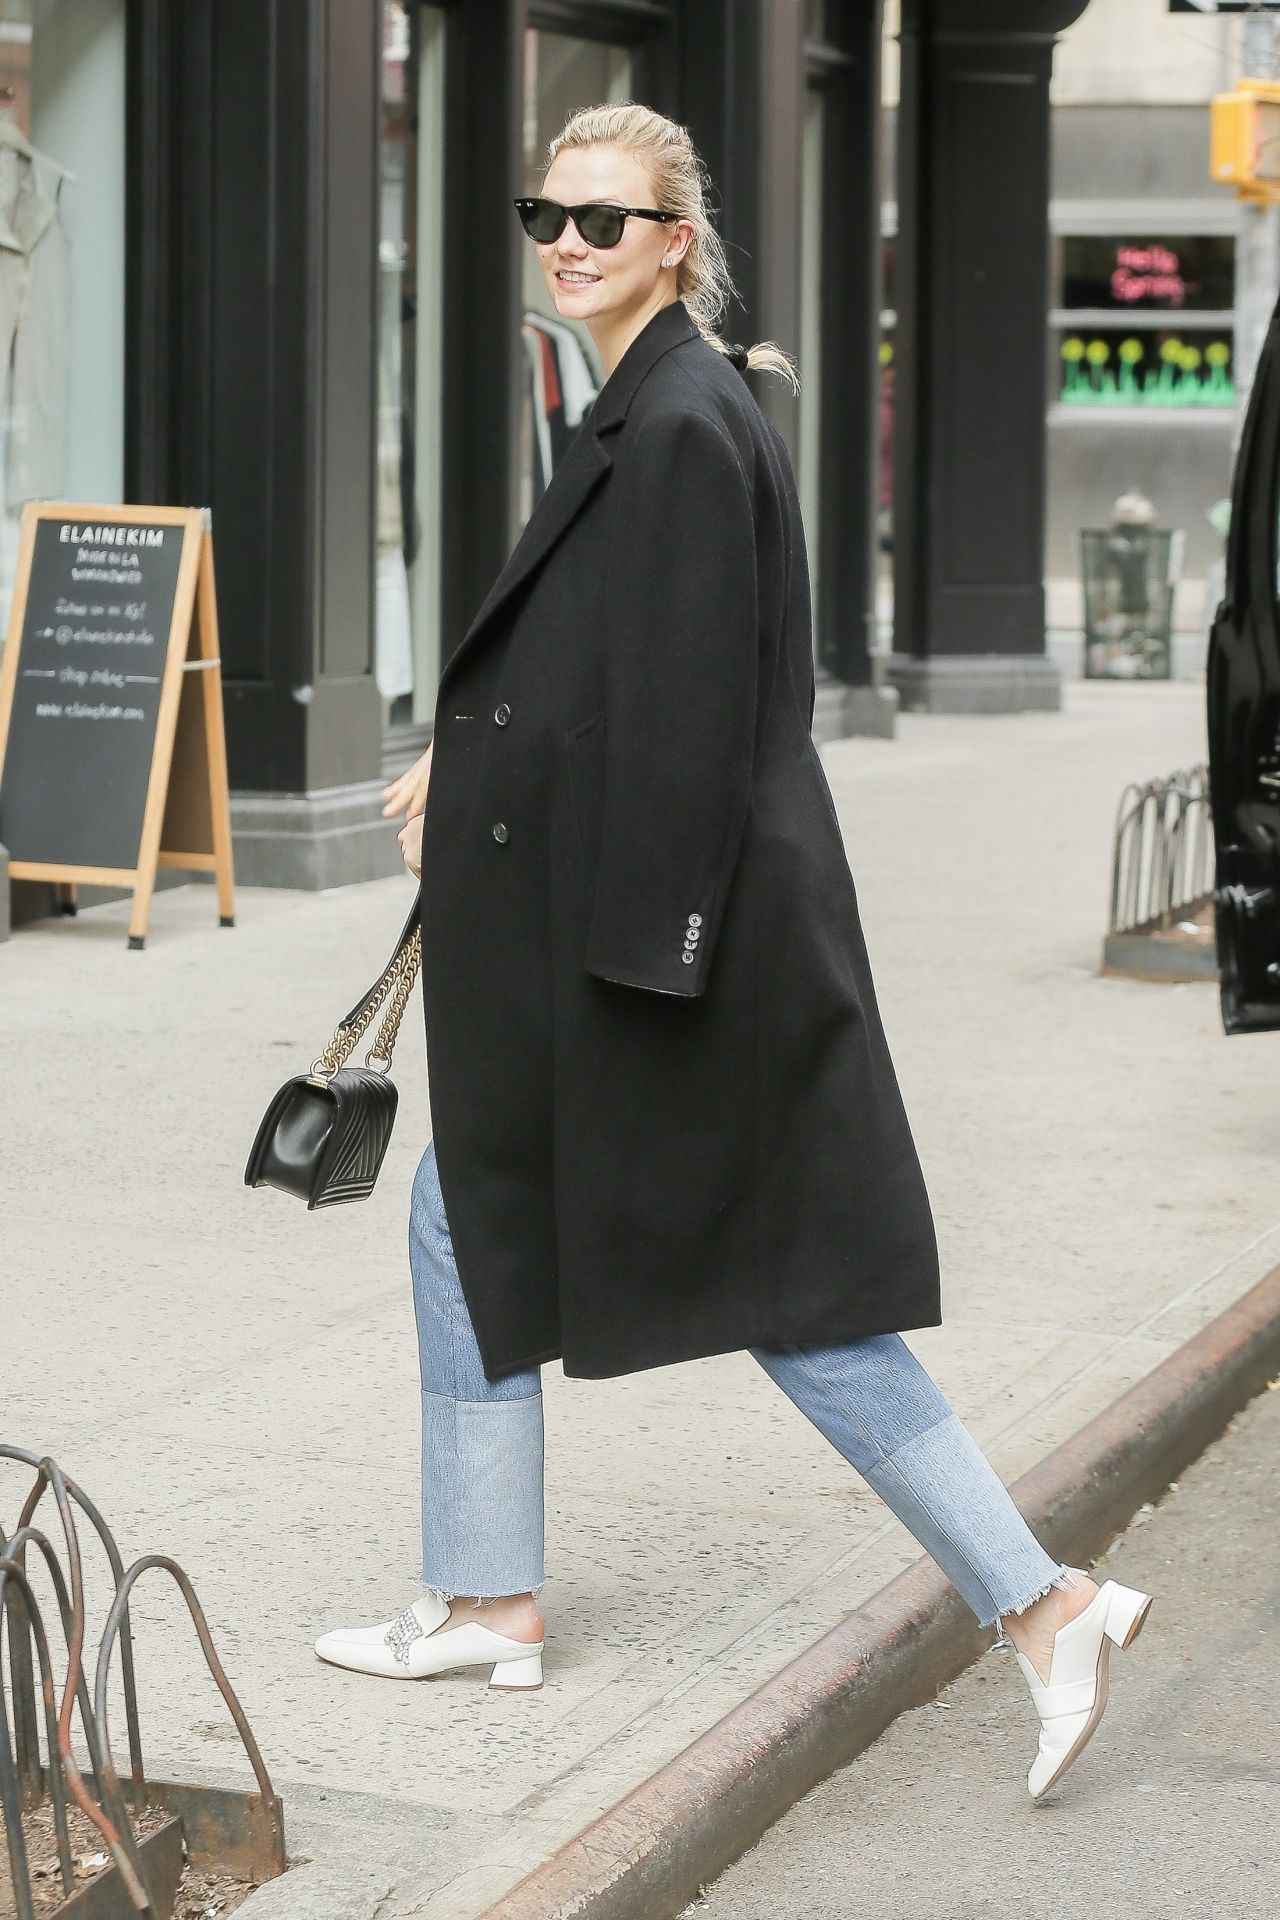 Karlie Kloss in CAsual Outfit - NYC 04/11/2018 • CelebMafia